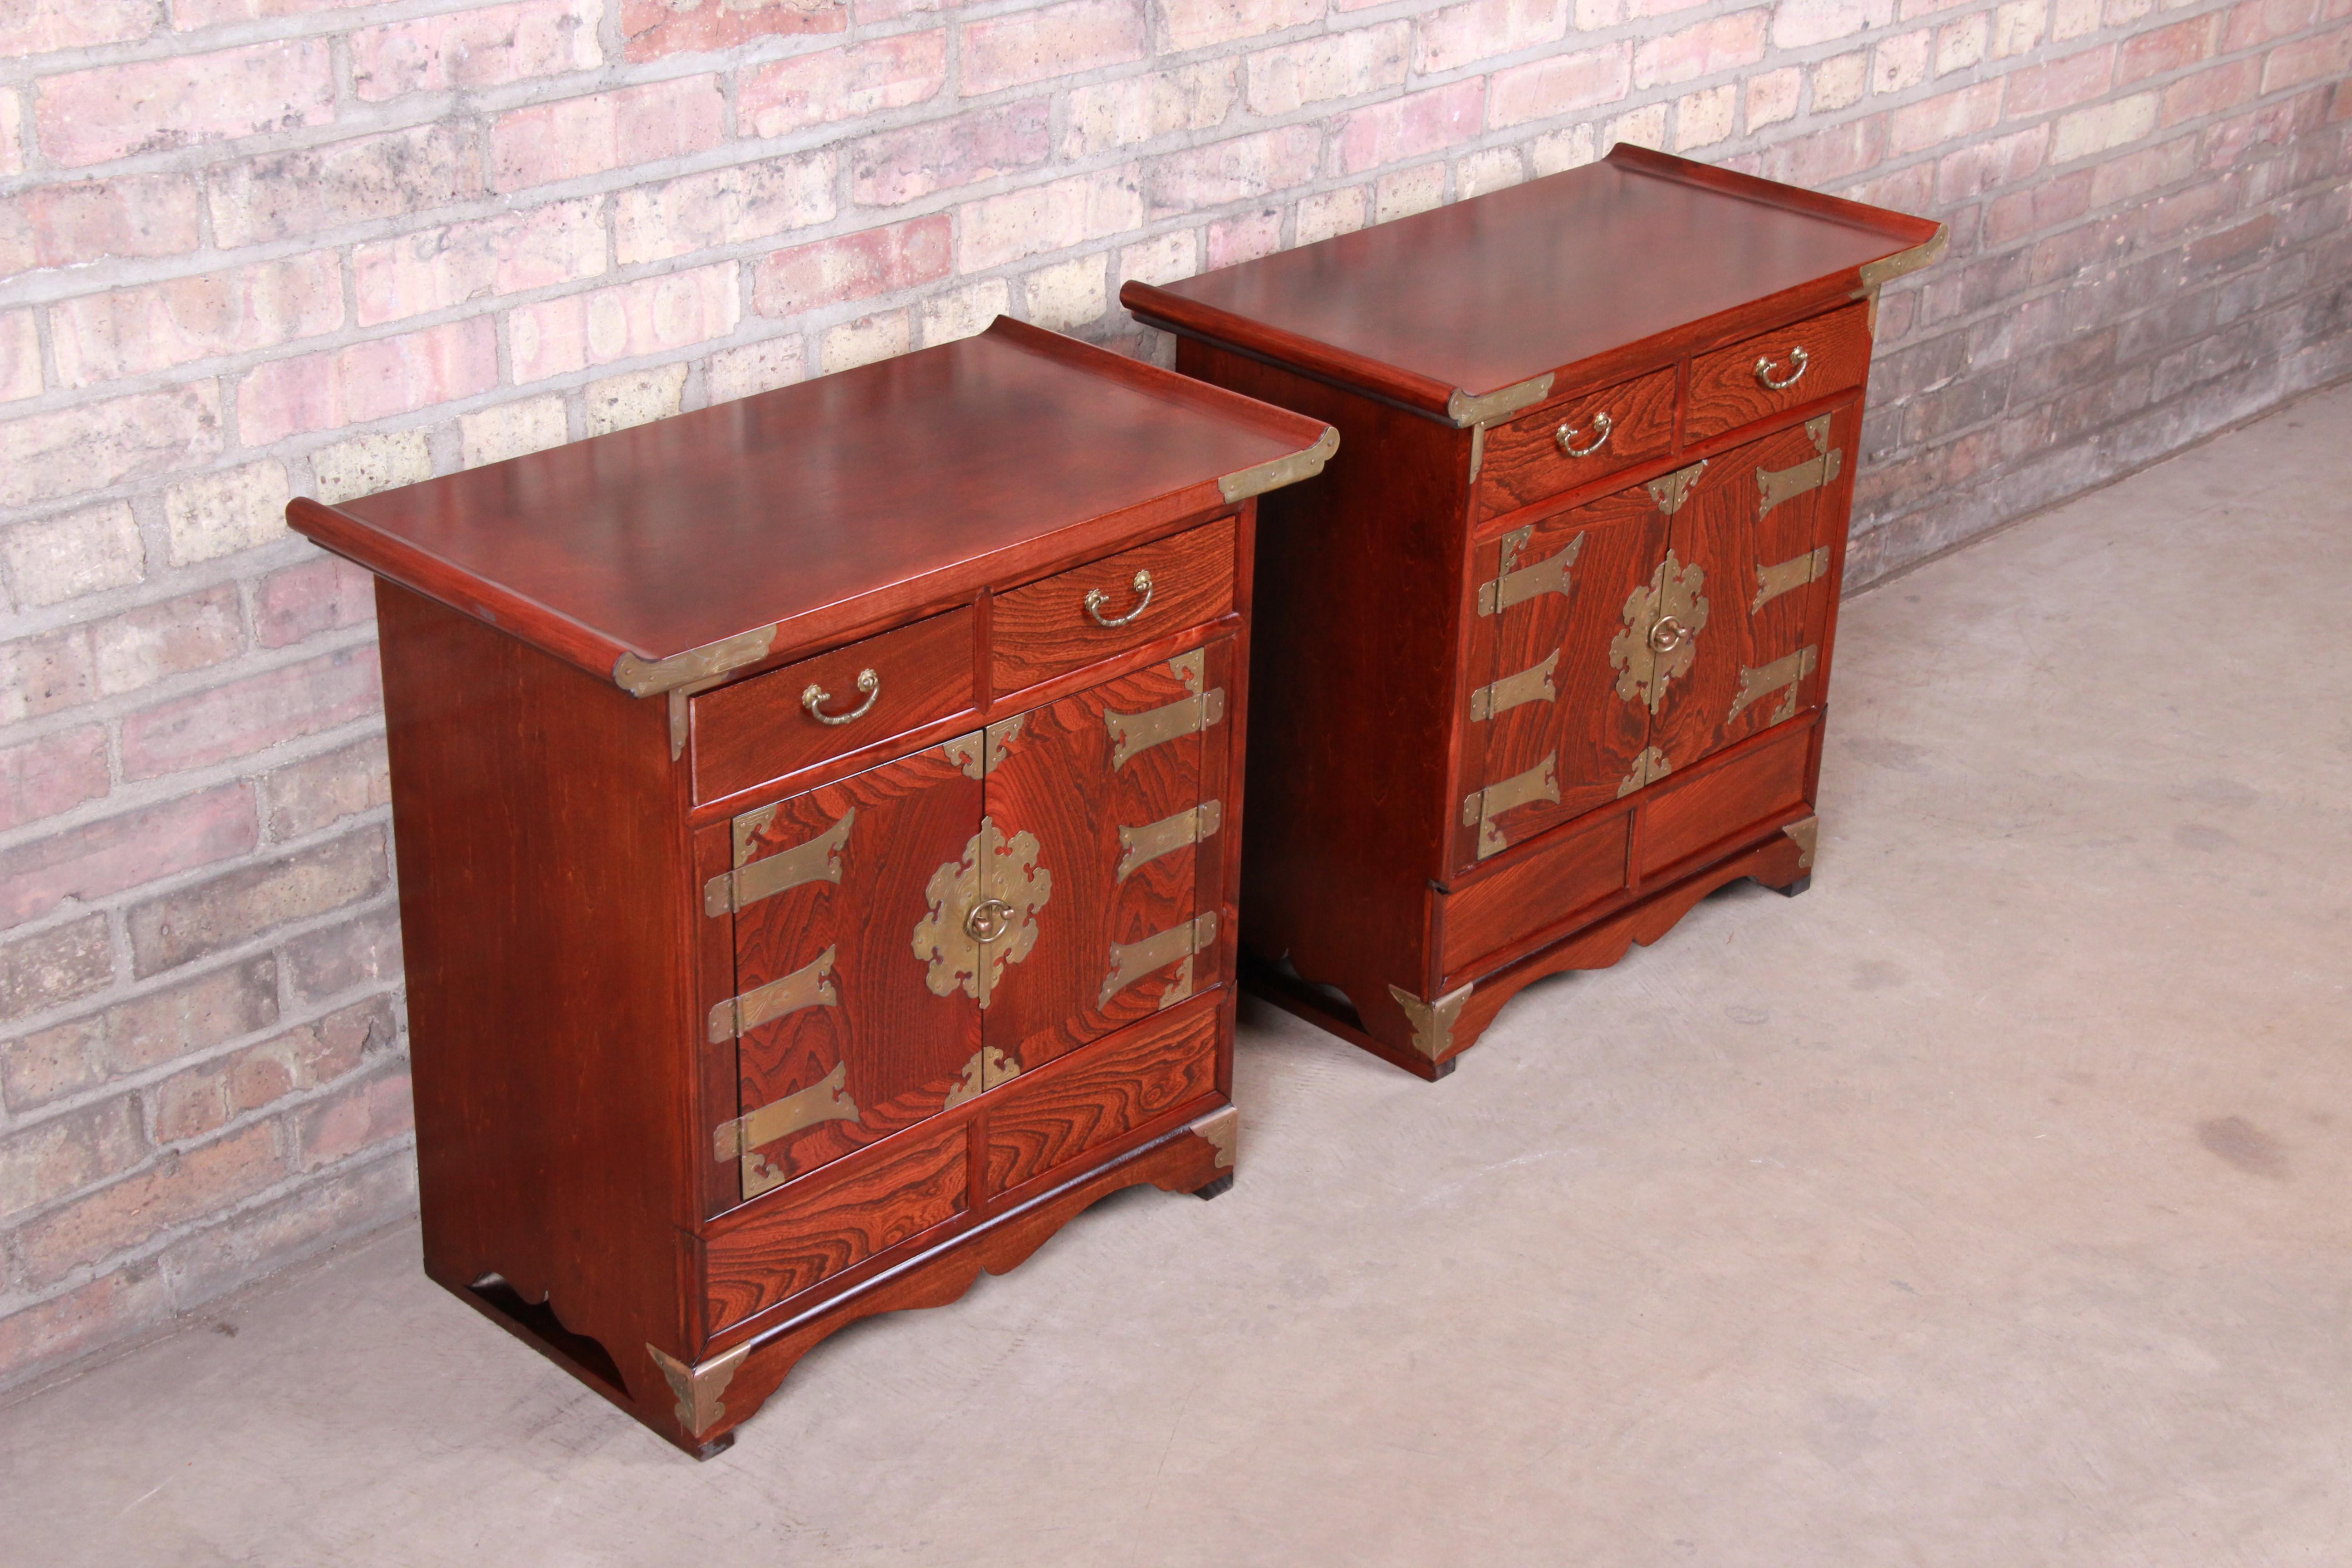 20th Century Korean Rosewood and Brass Bedside Chests or Commodes, Pair